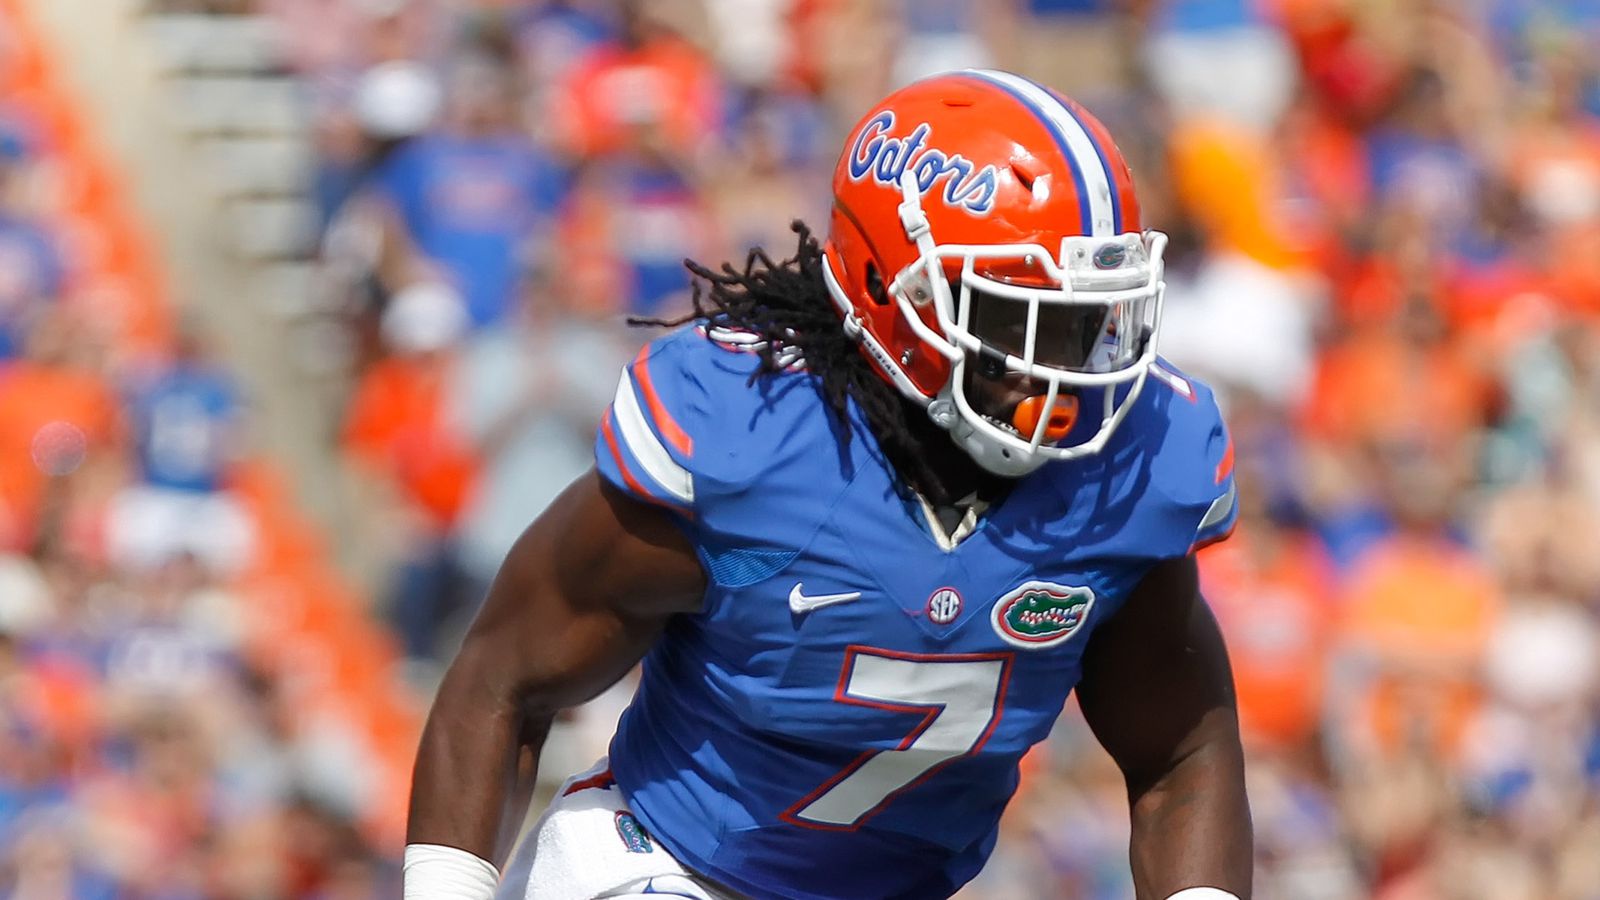 2014 NFL Draft Results: Saints Select Ronald Powell with ...
